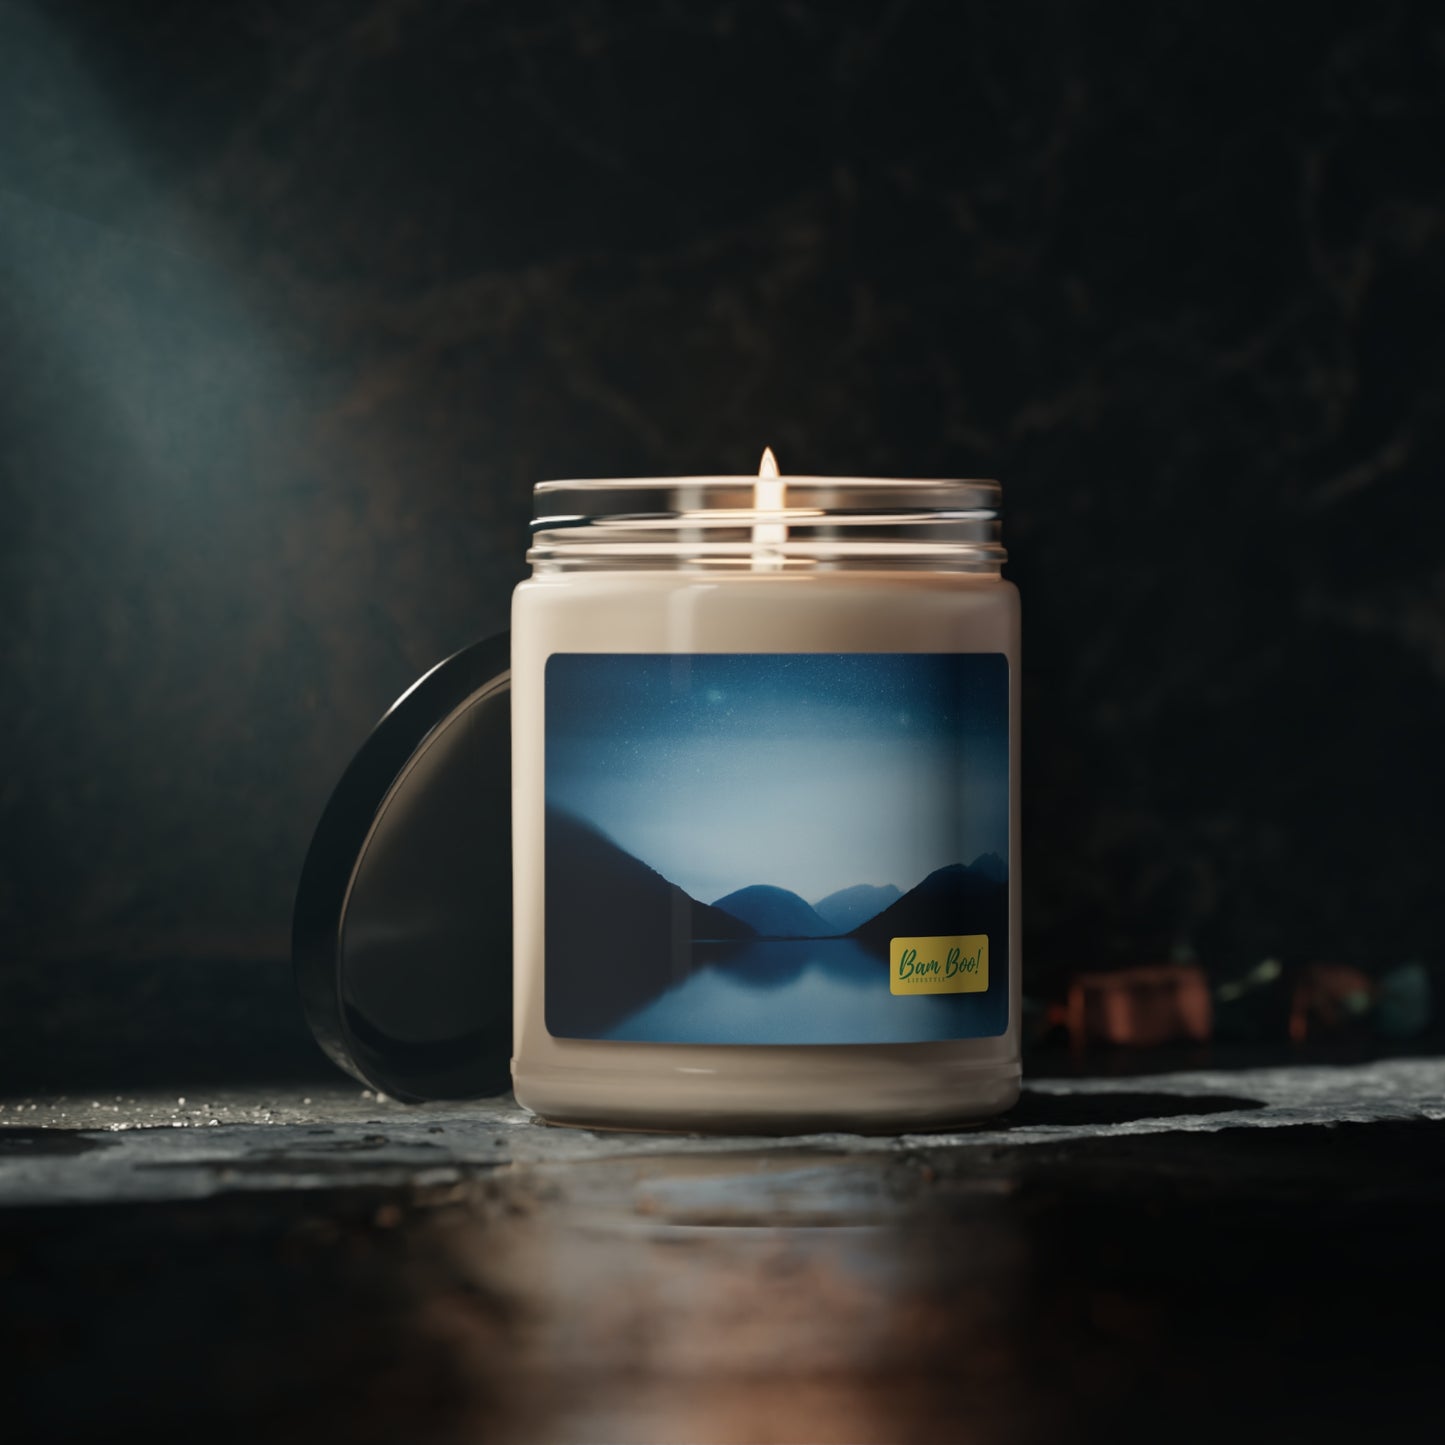 The Wonders of Phenomenal Nature - Bam Boo! Lifestyle Eco-friendly Soy Candle